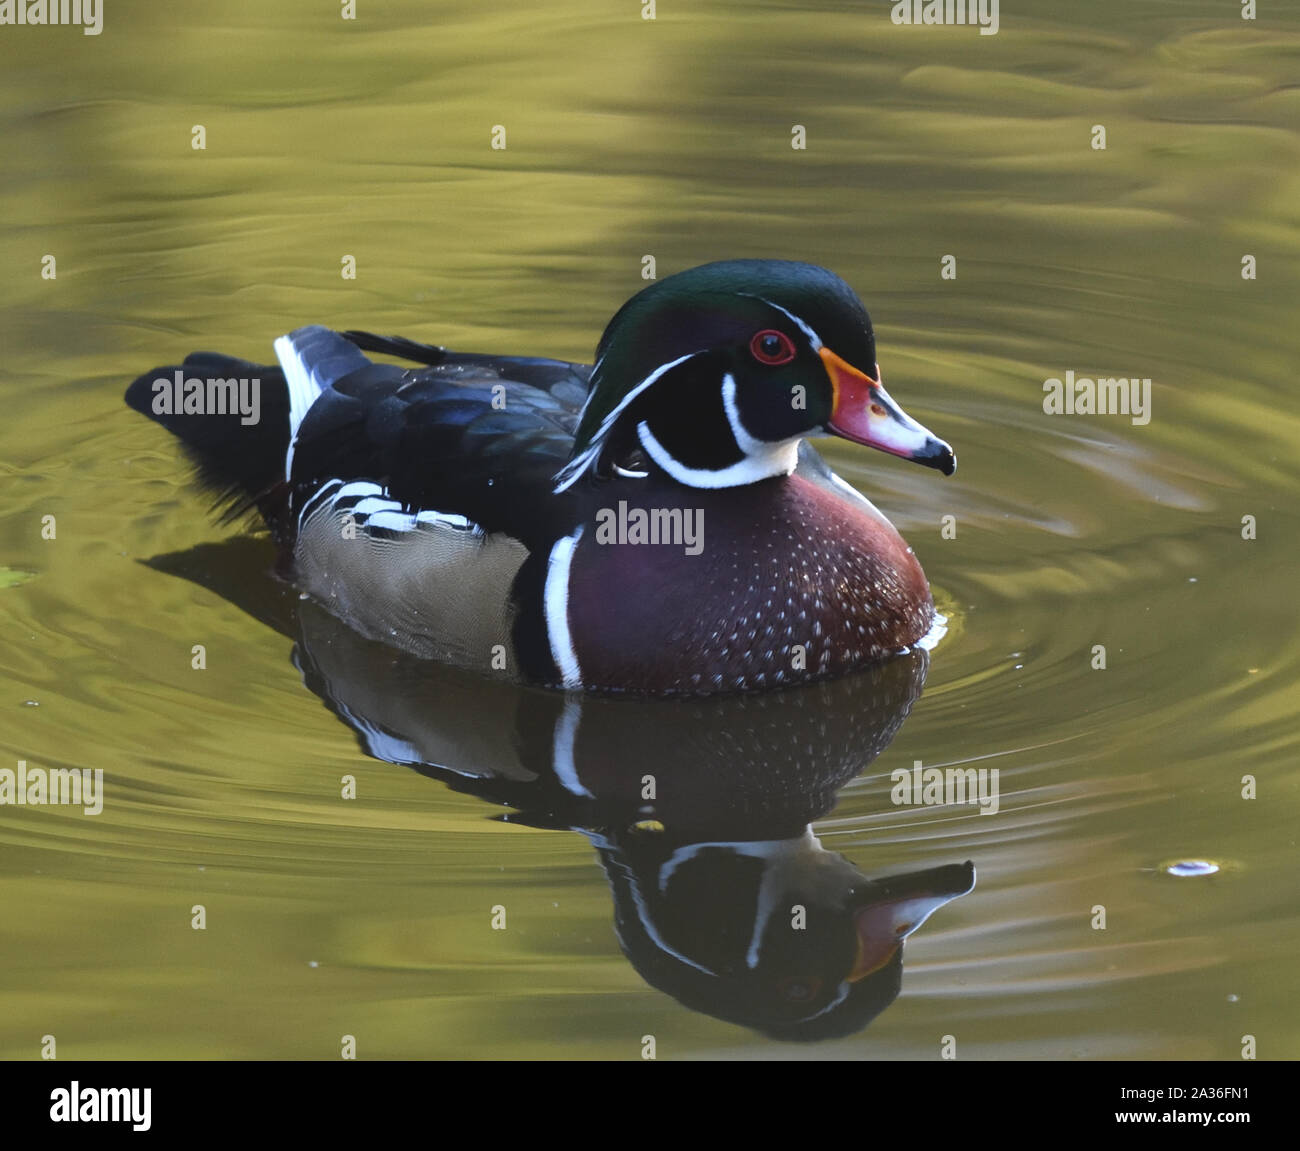 A male wood duck or Carolina duck (Aix sponsa) on a wooded pool in Stanley Park. Lost Lagoon, Stanley Park, Vancouver, British Columbia, Canada. Stock Photo